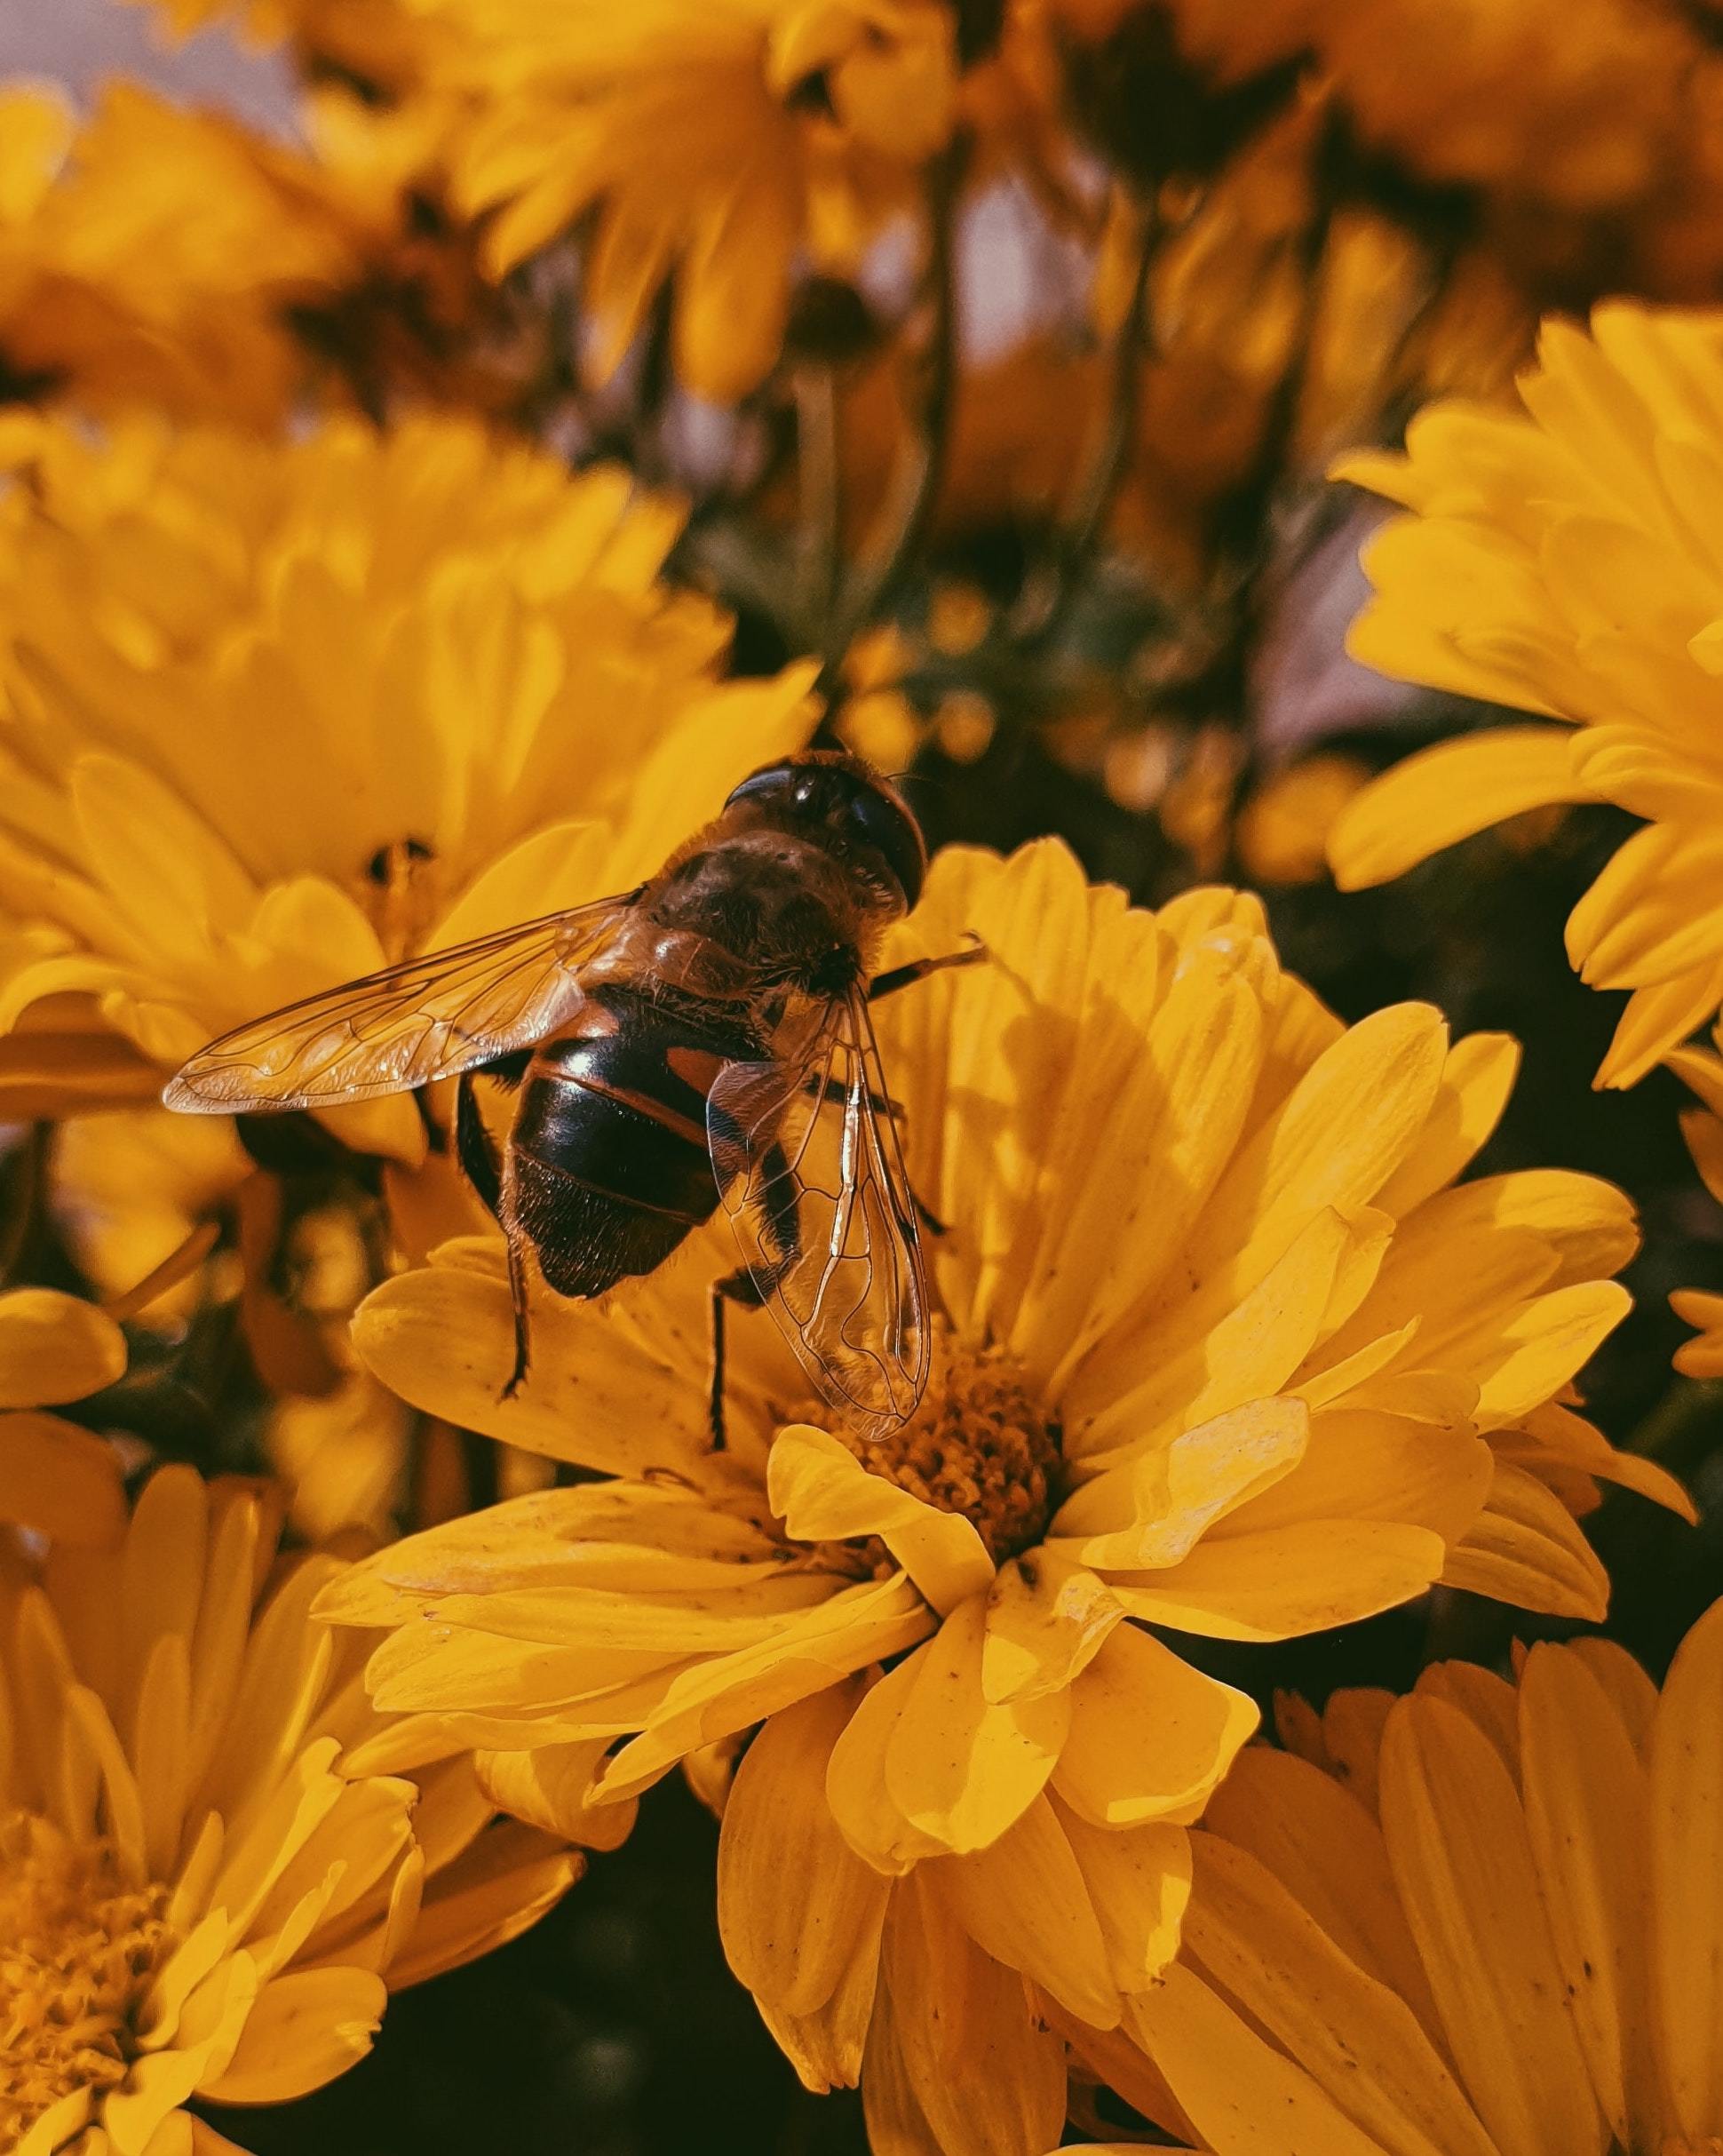 Can Beekeeping be Sustainable?